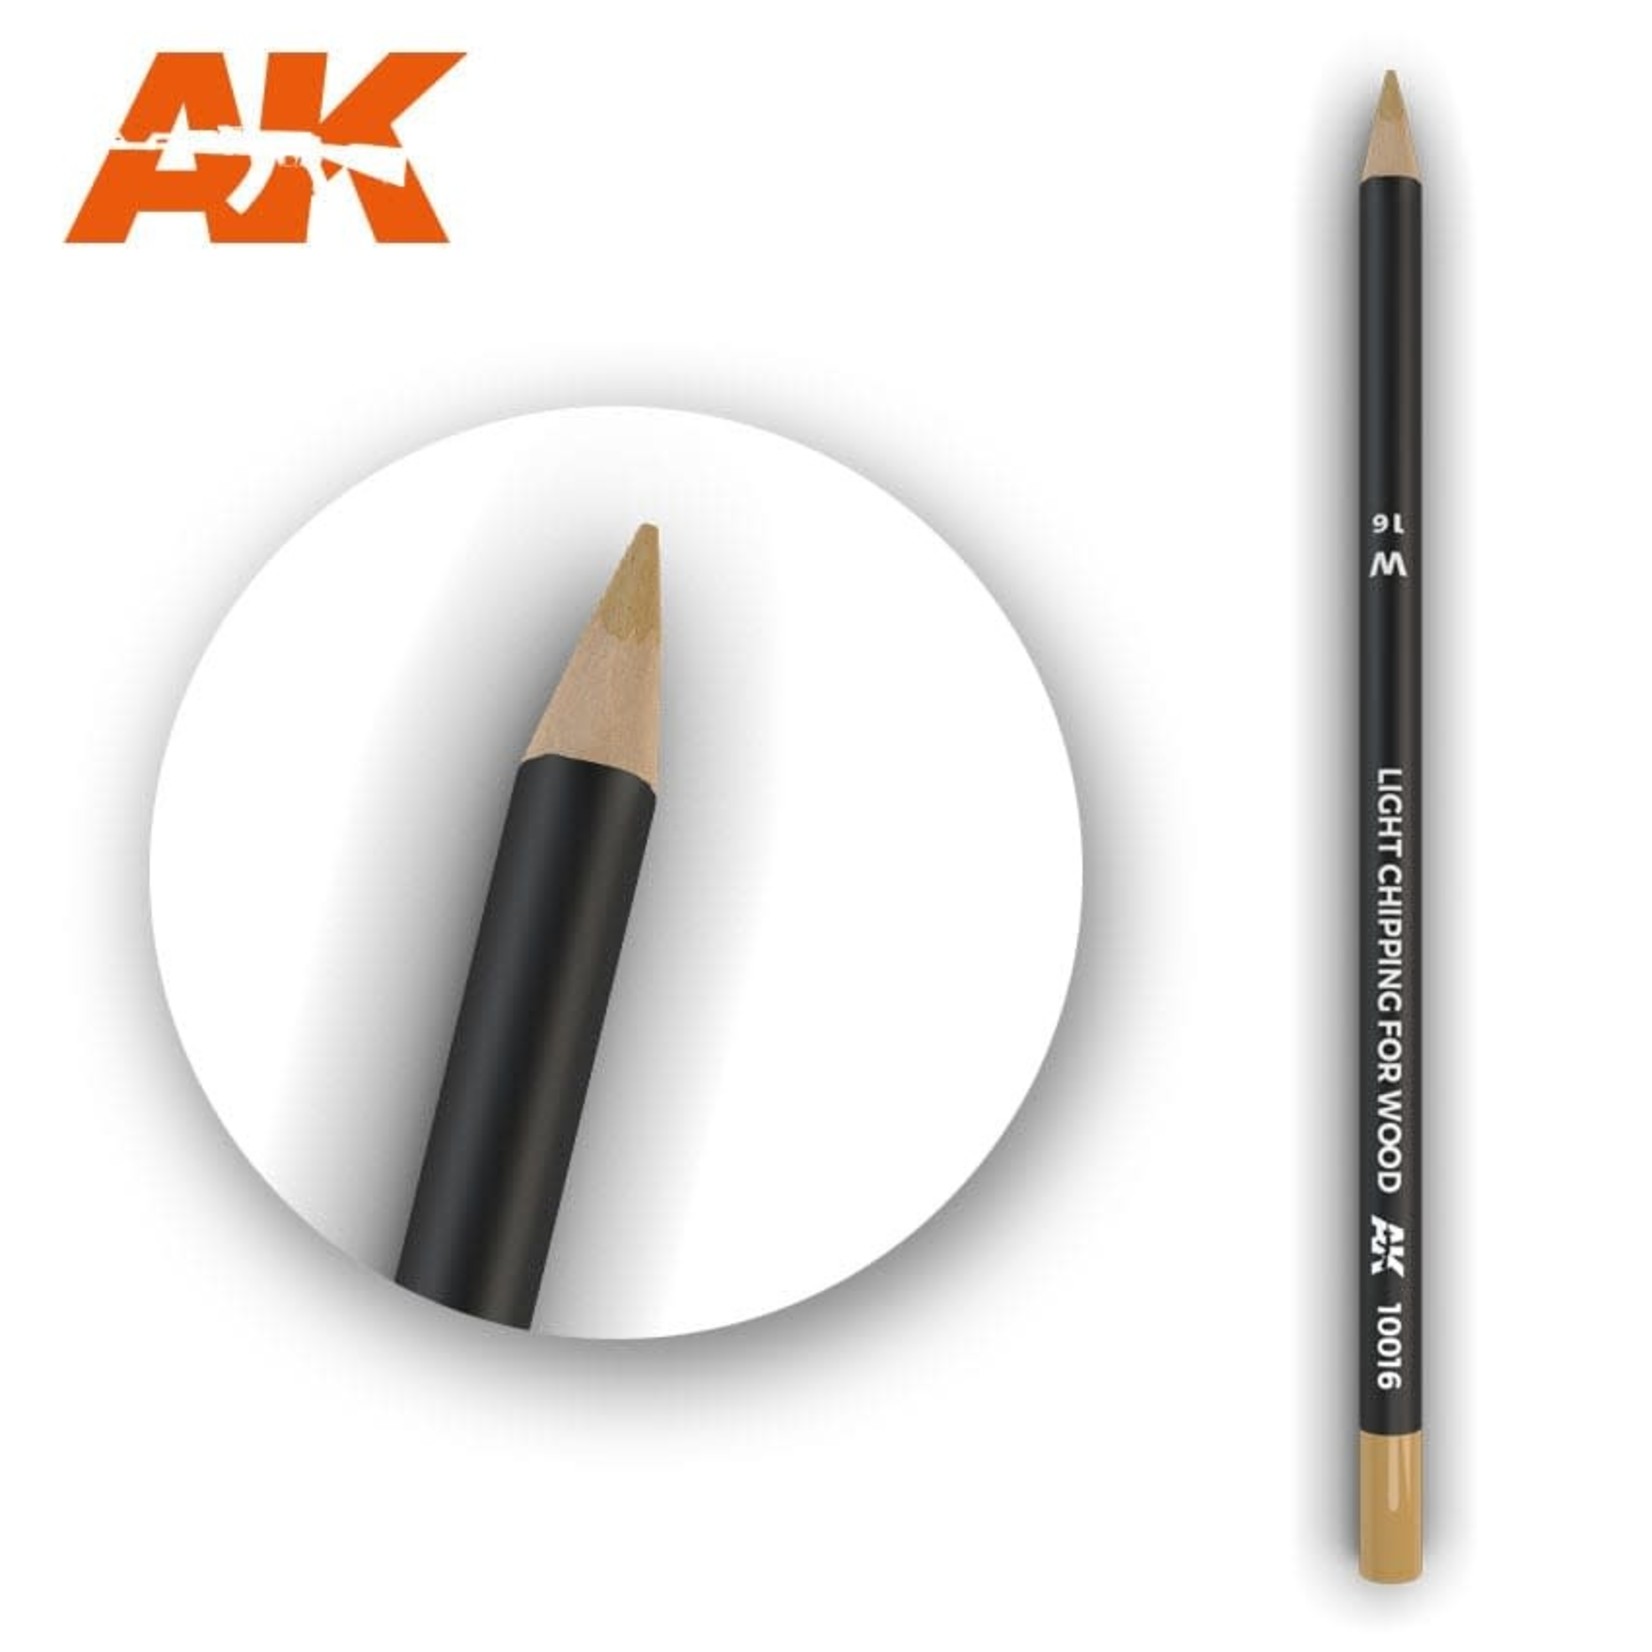 AK Interactive AK10016 Weathering Pencil - Light Chipping for Wood